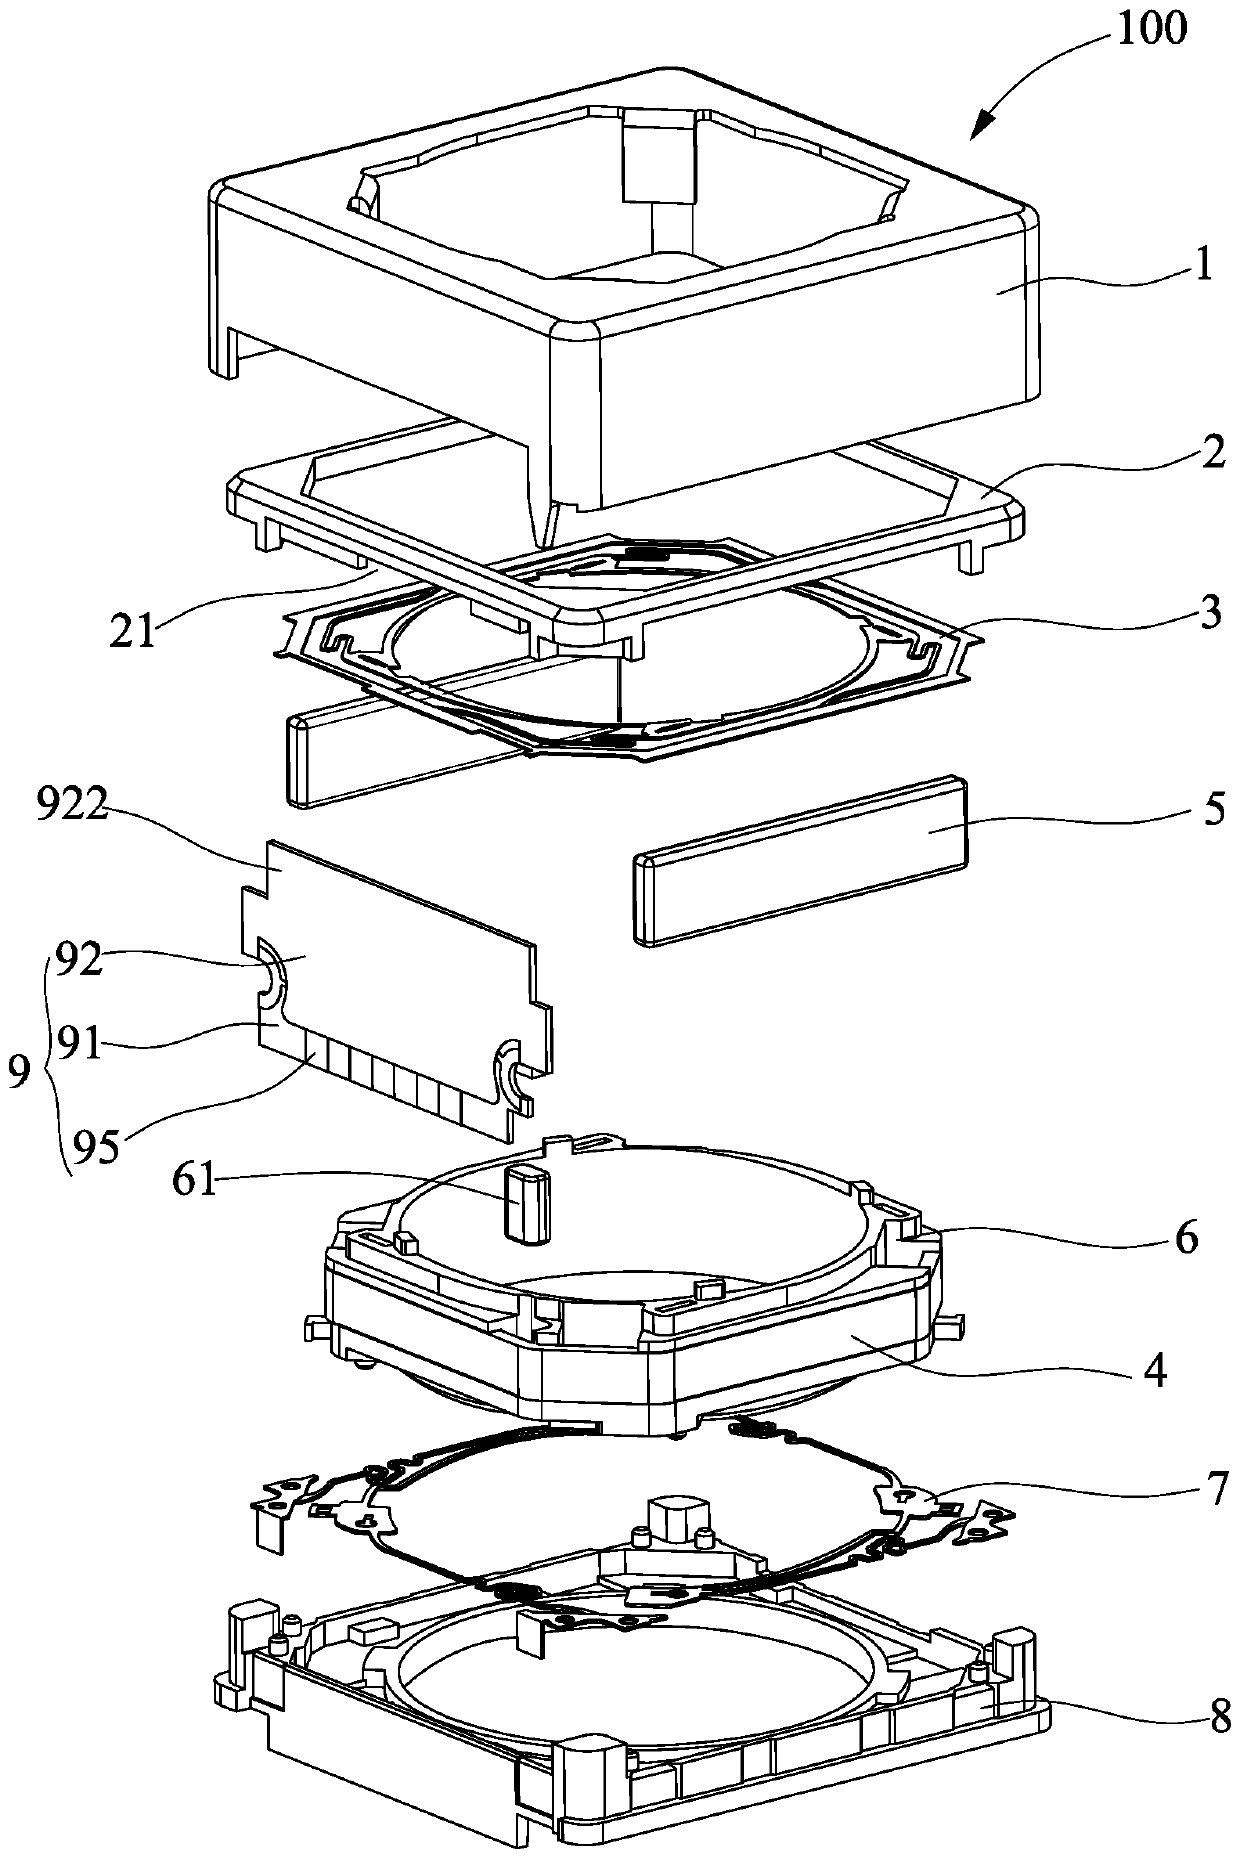 Structure for sensing motion track of voice coil motor